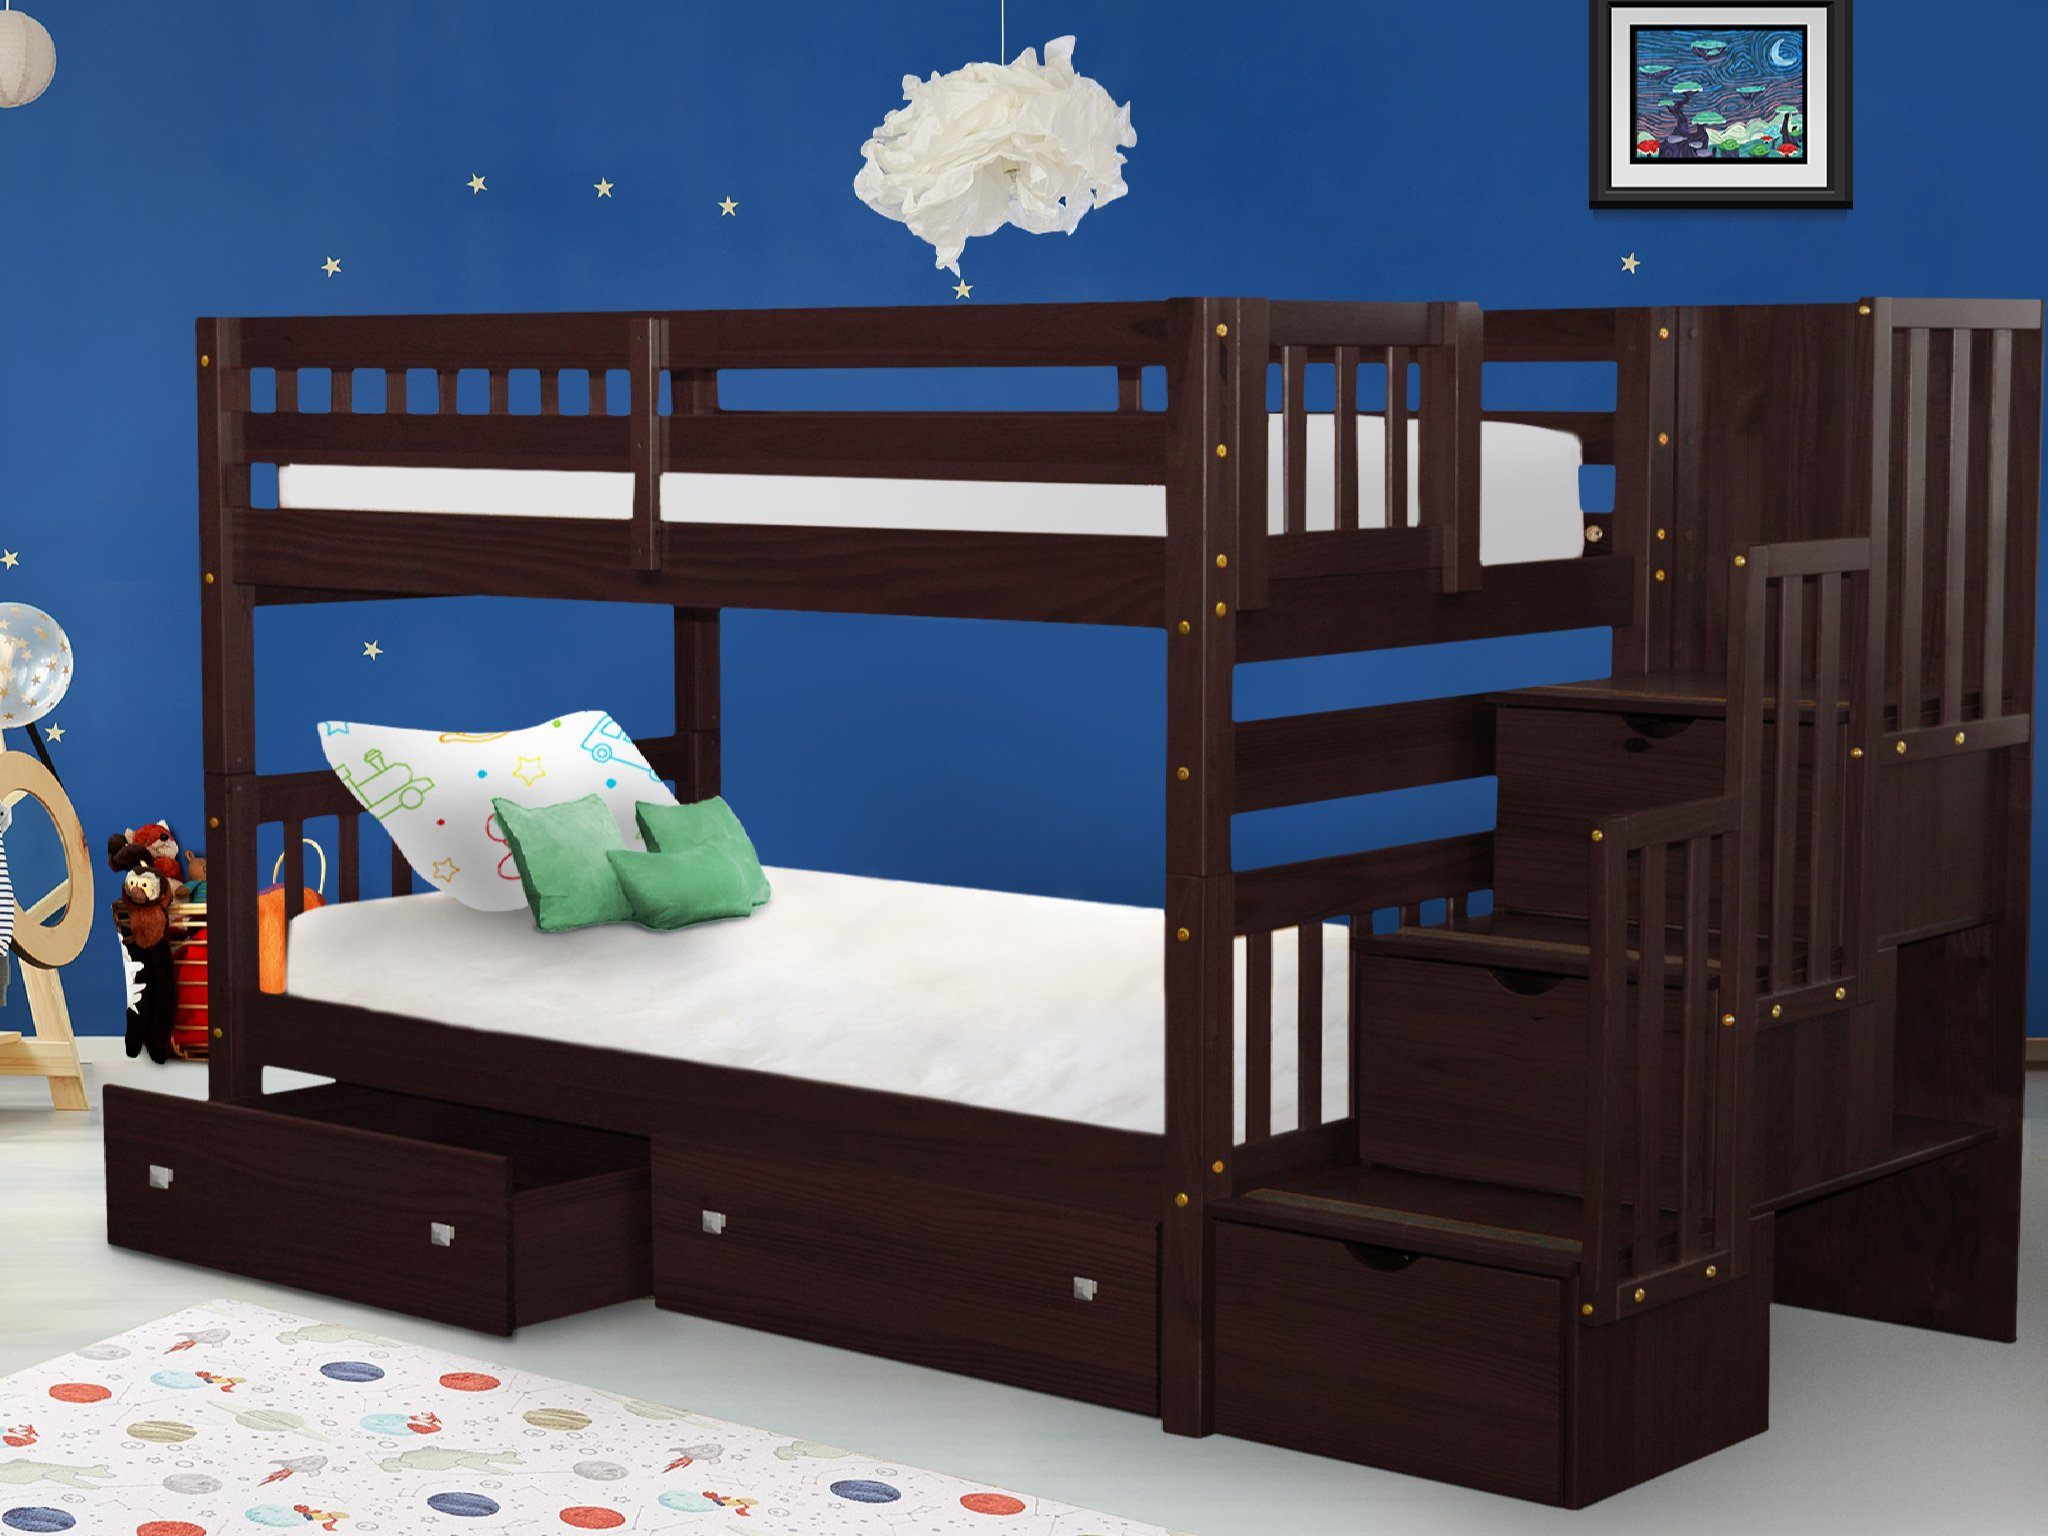 Bedz King Stairway Bunk Beds Twin over Twin with 3 Drawers ...